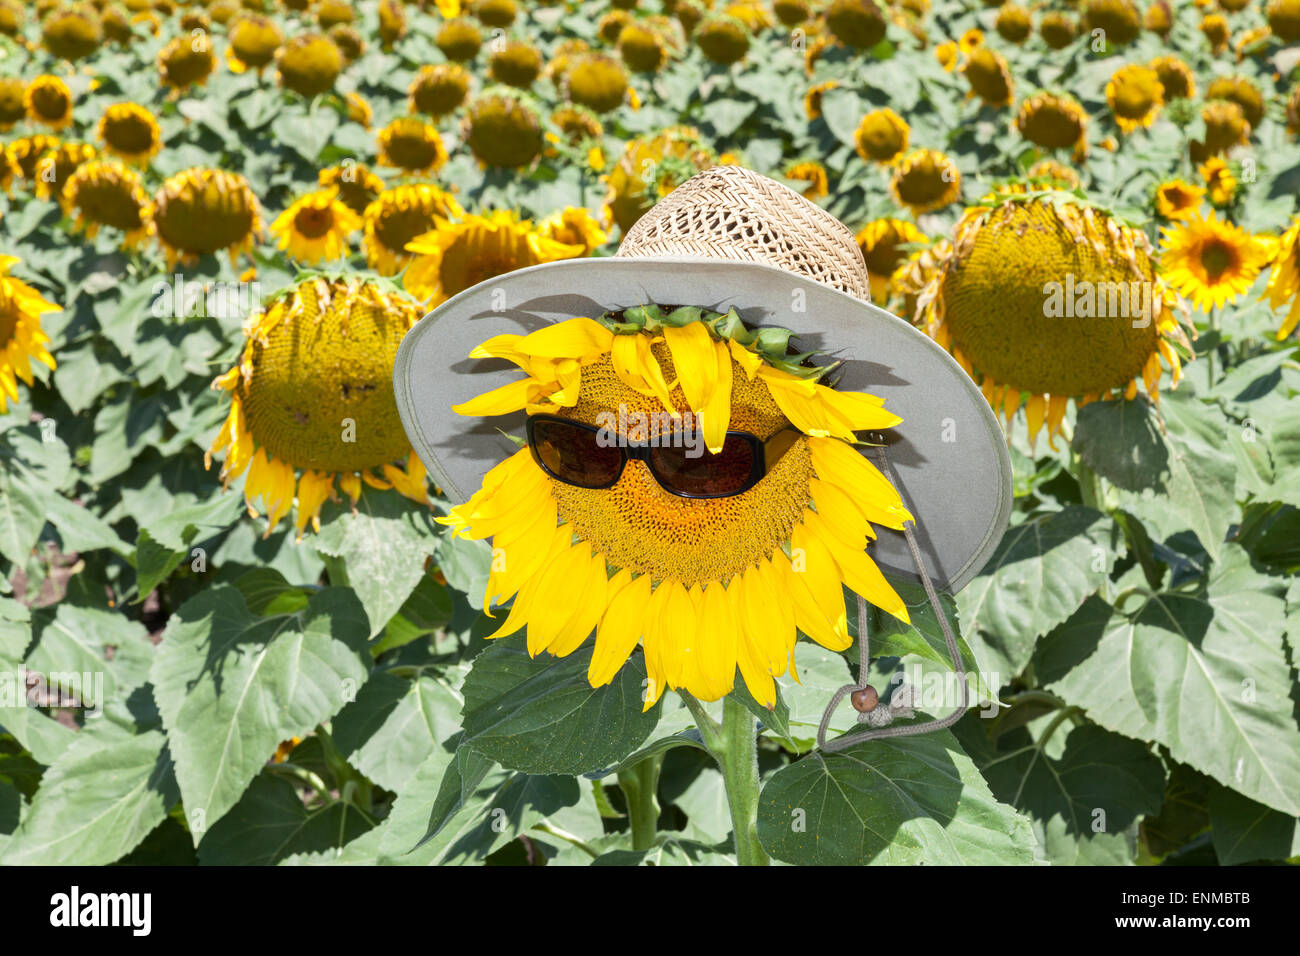 Sunflowers in NSW Australia in region of Quirindi at the height of summer Stock Photo